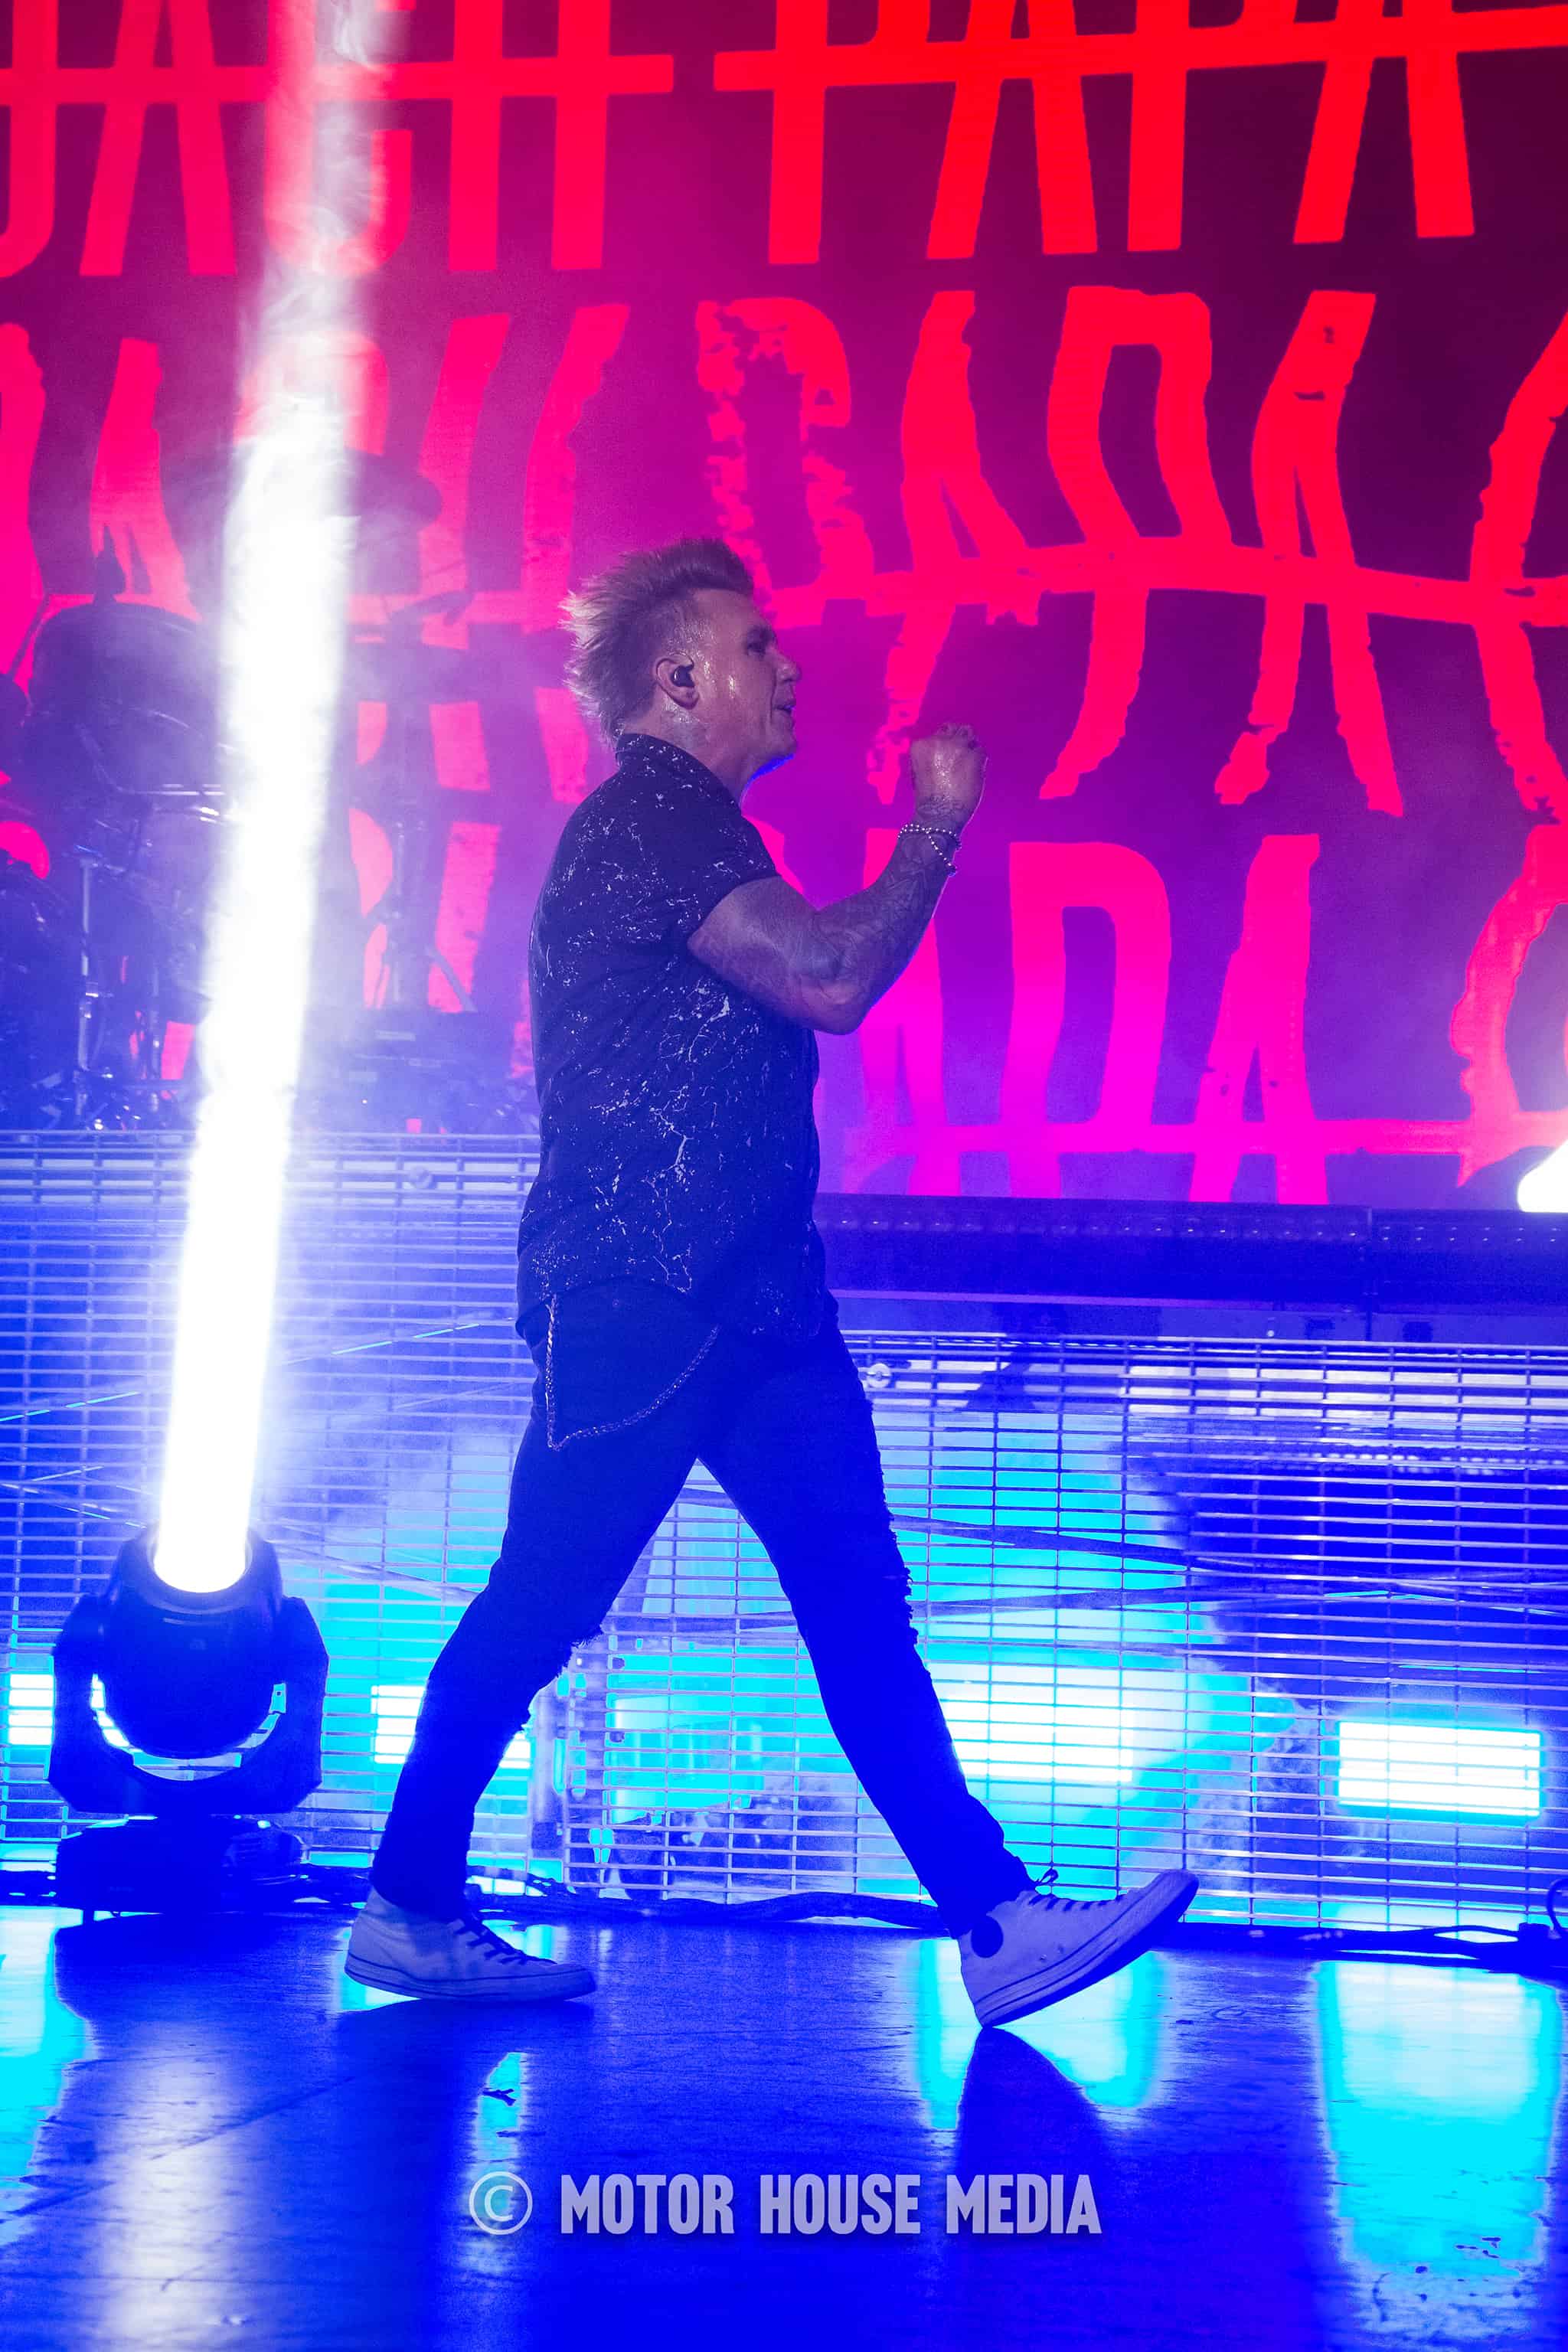 Jacoby Shaddix strutting on stage